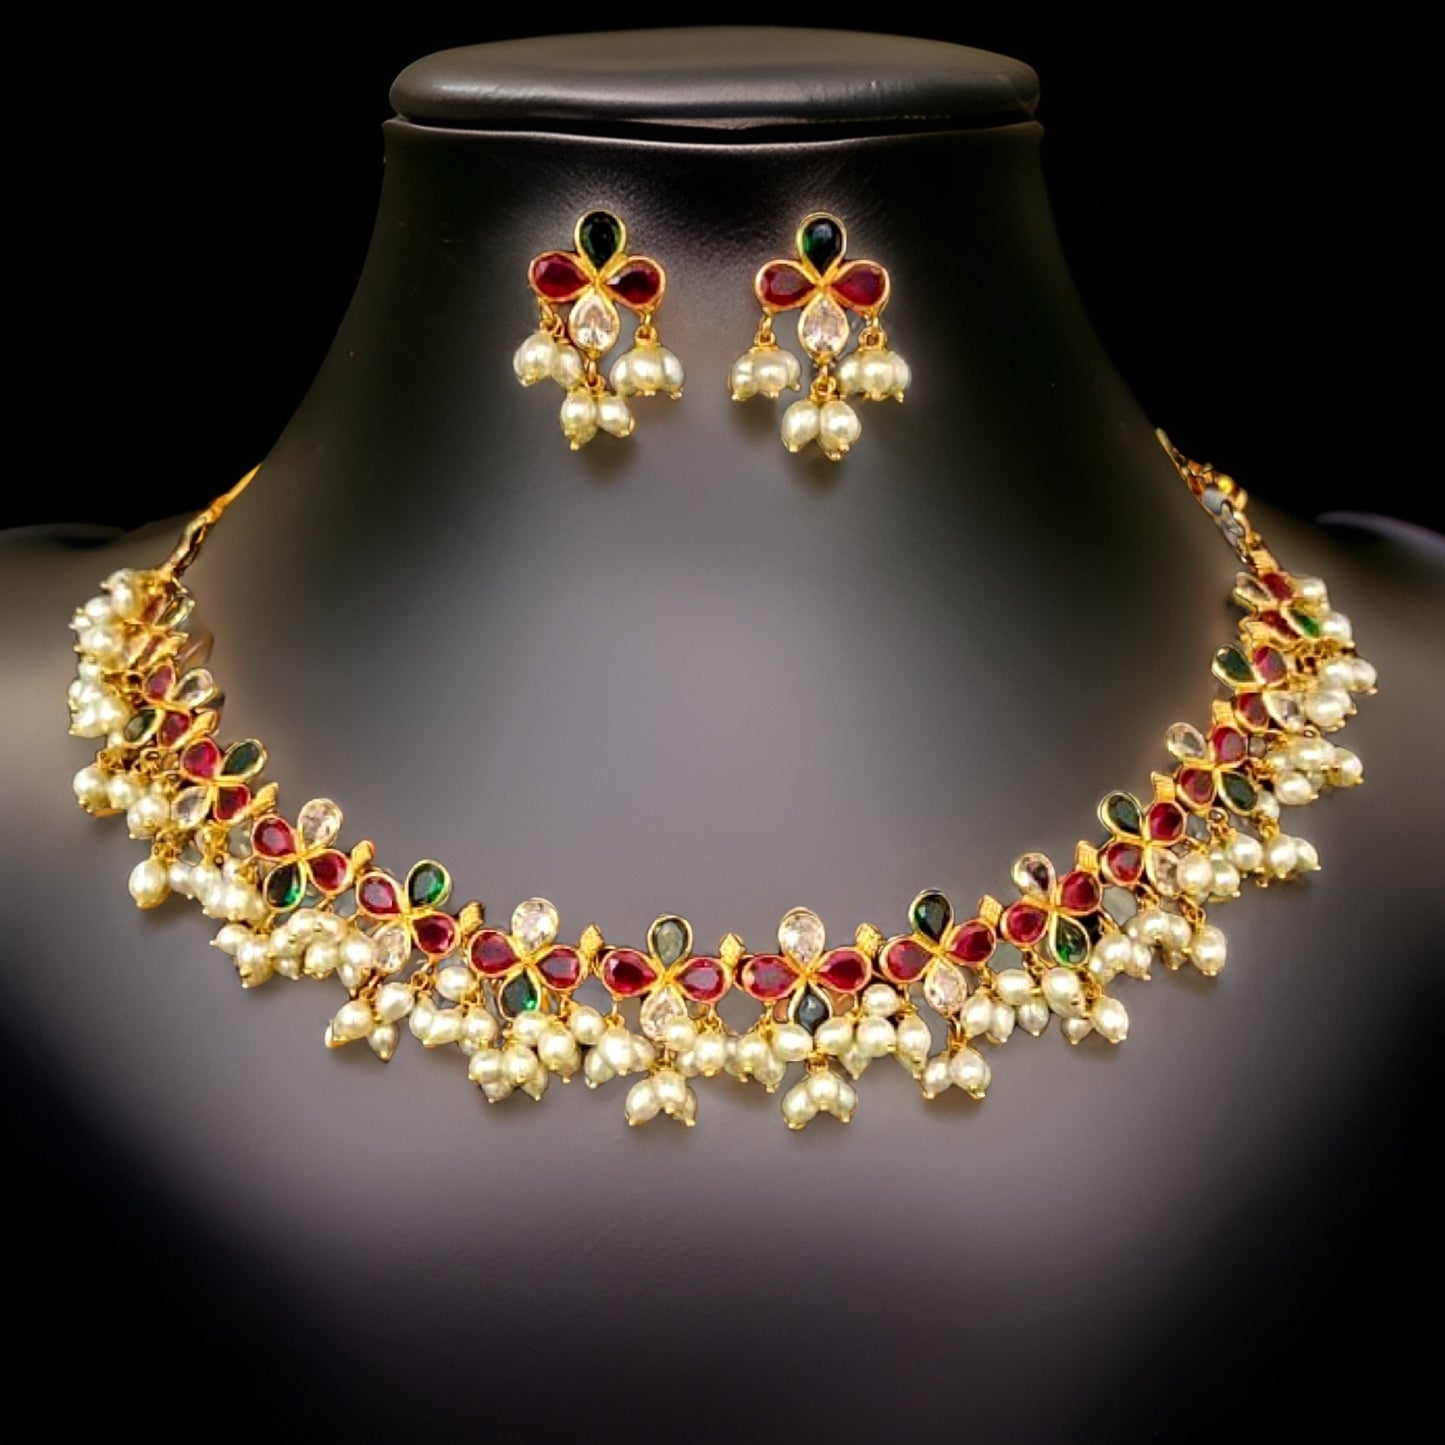 22KT Gold stone-Pearl Necklace and Earrings Set